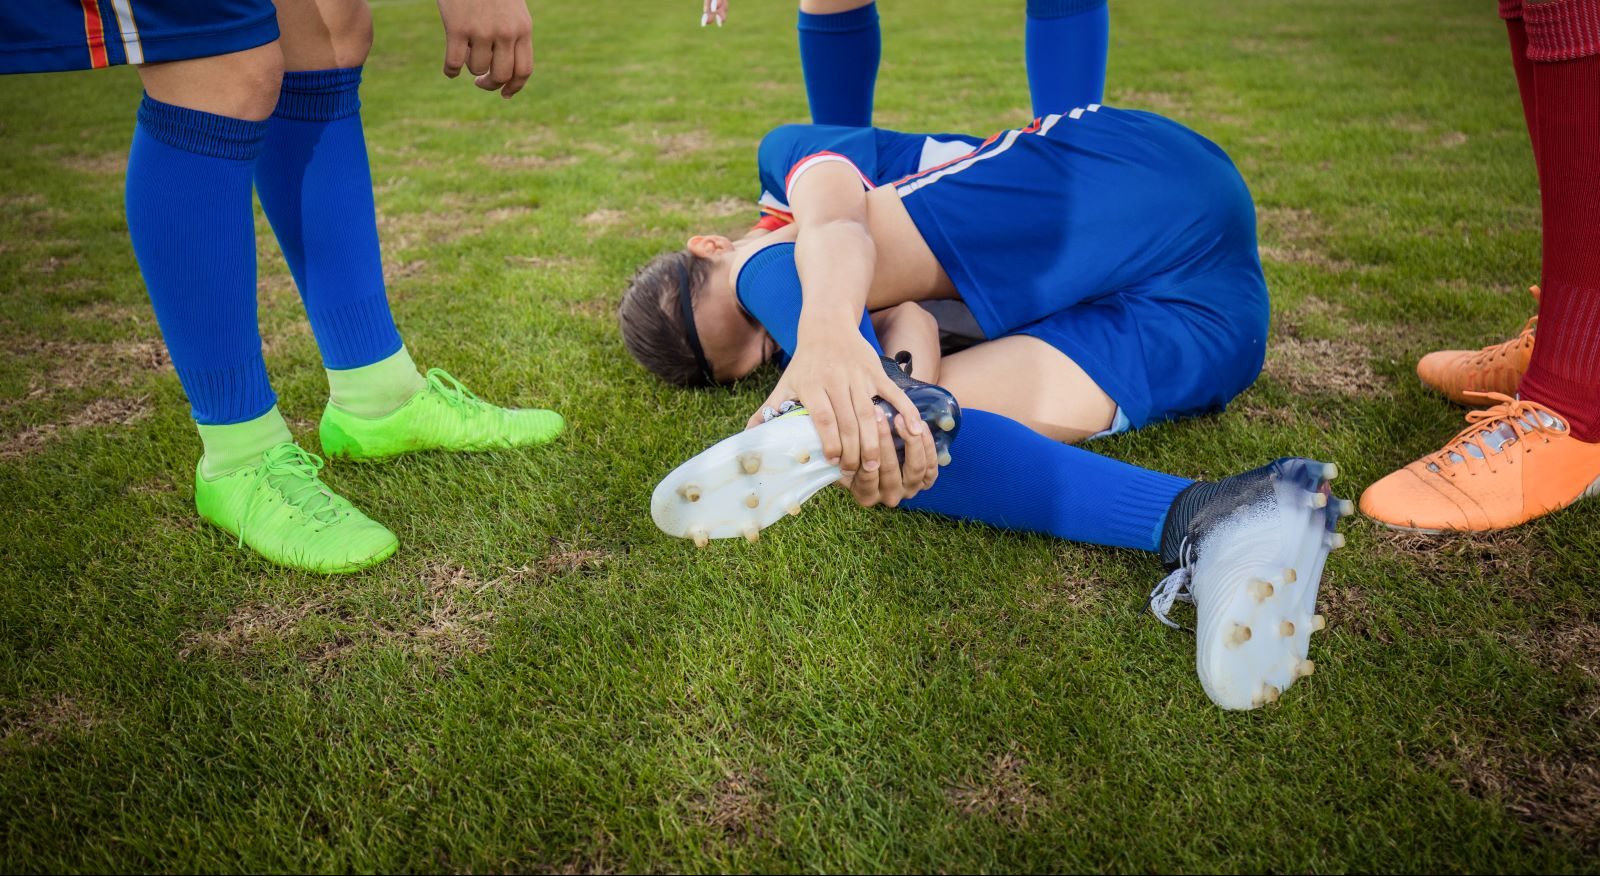 As talented youth athletes (and their parents and coaches) chase dreams of professional stardom, many will encounter overuse injuries.